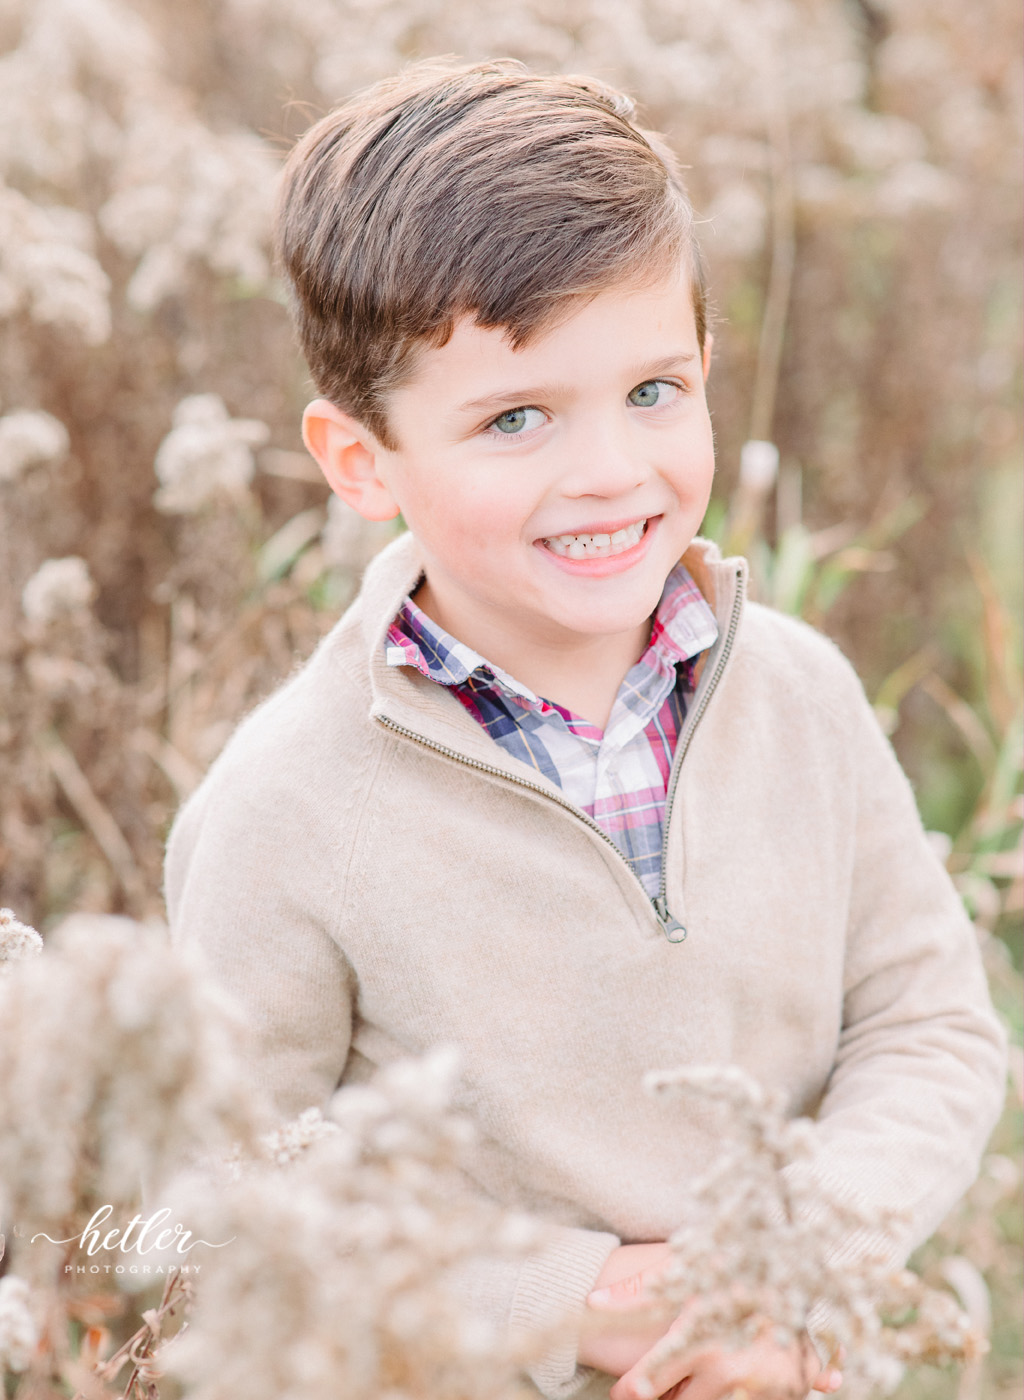 Fall family photos in Ada Michigan at Roselle Park